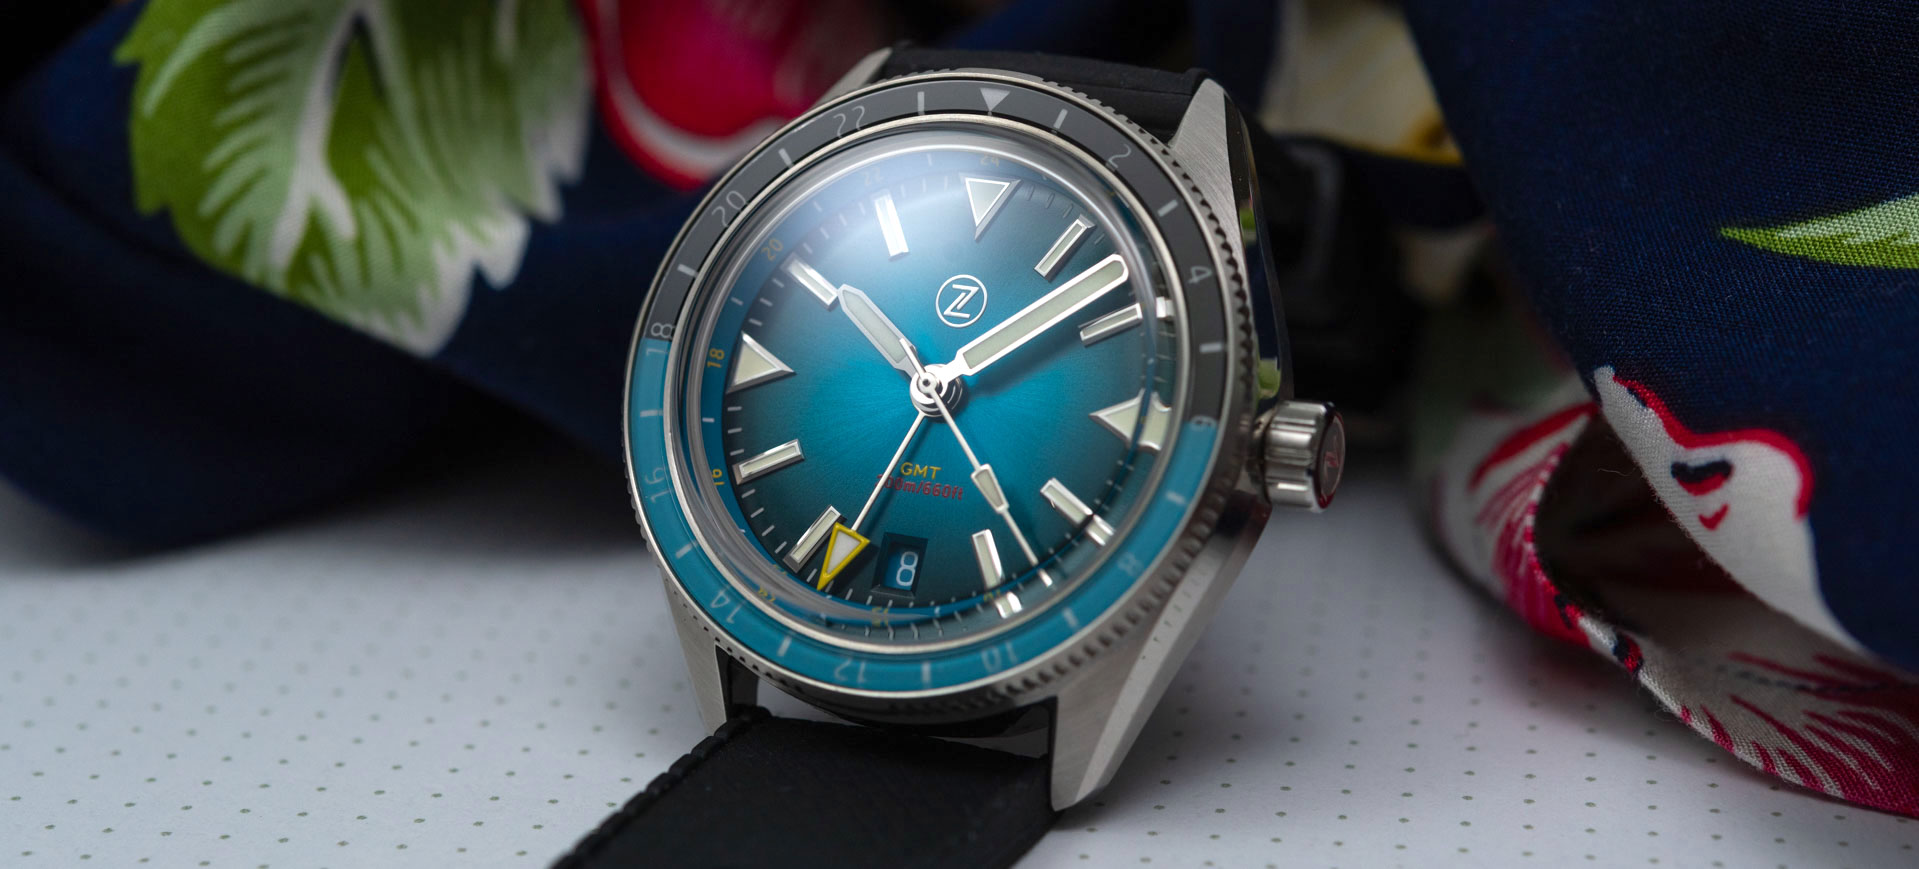 Watch Review: Zelos Horizons V2 GMT 200m Teal